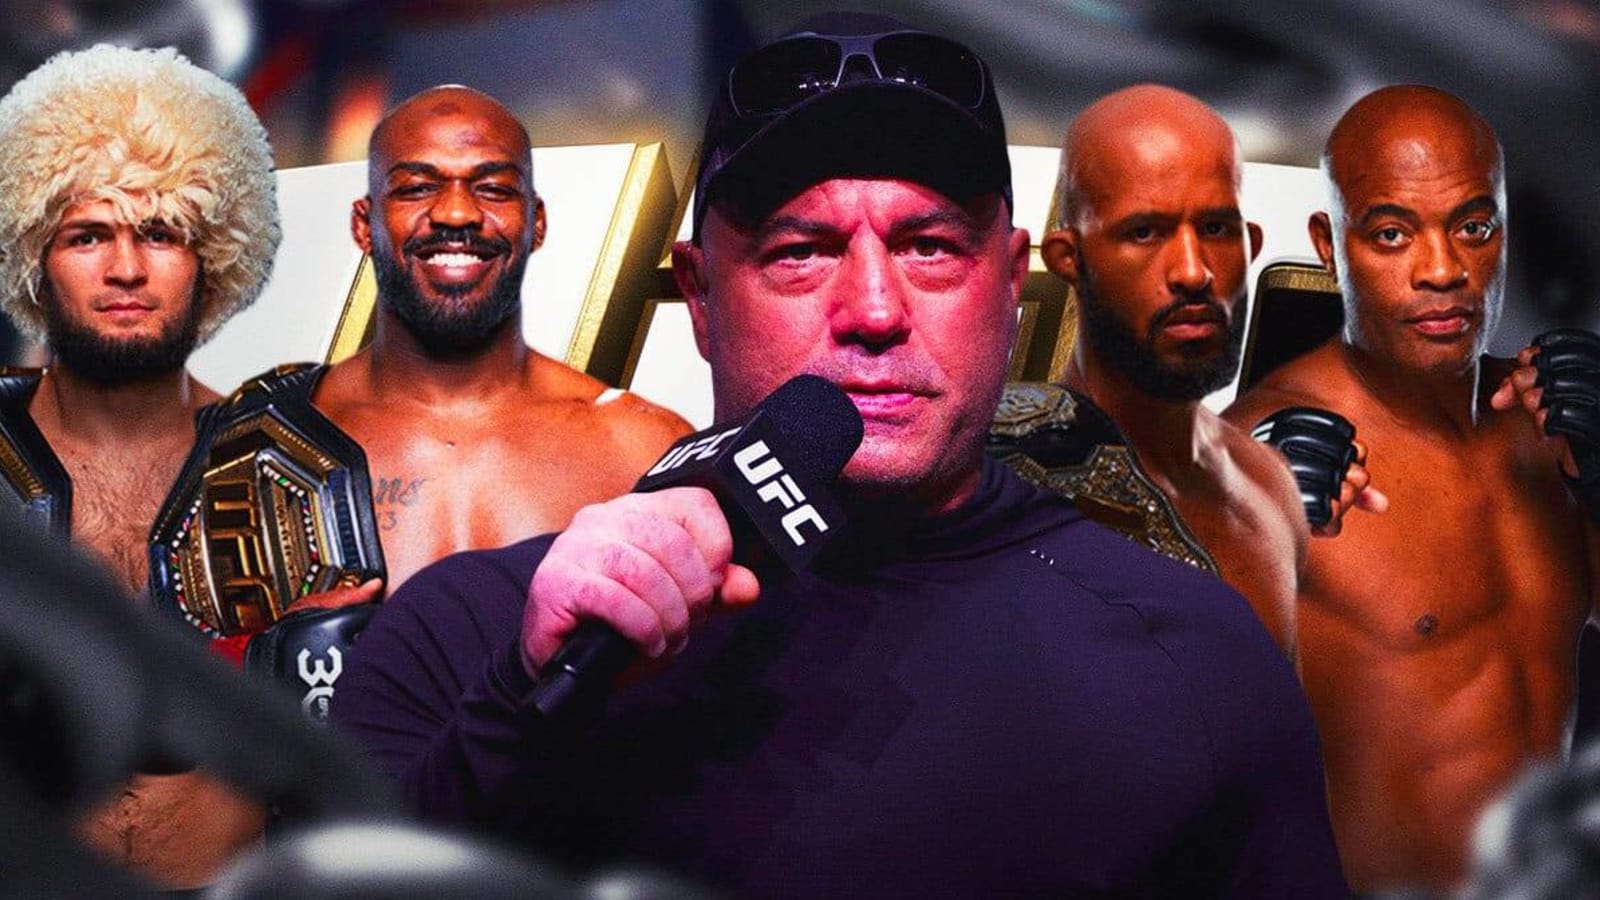 Joe Rogan reveals his pick for the GOAT in the UFC